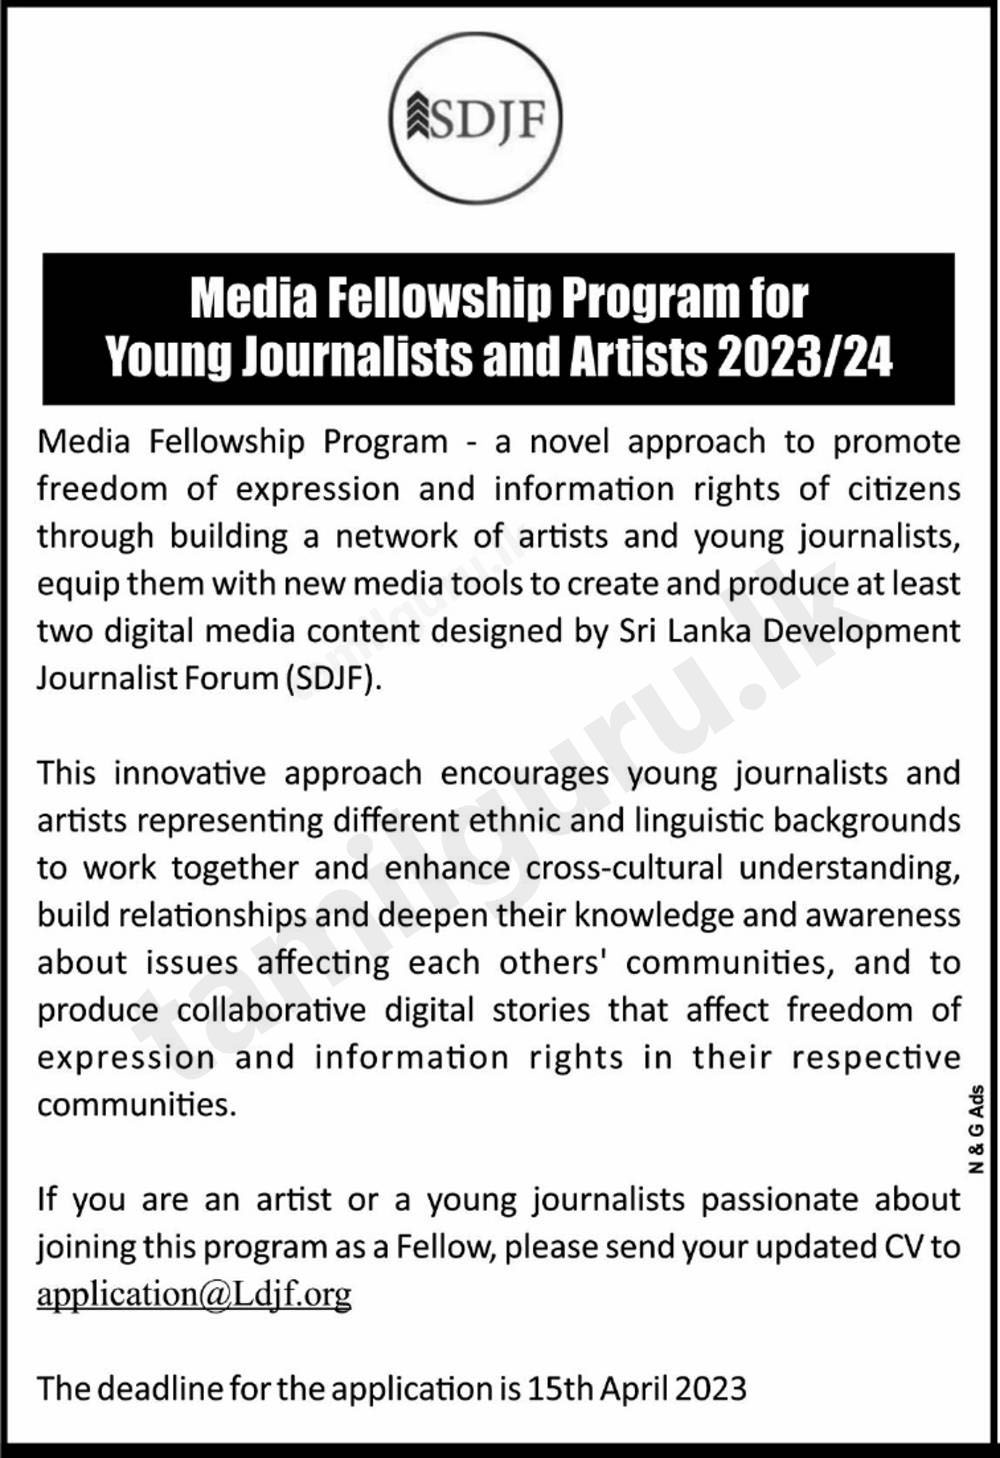 Media Fellowship Program for Young Journalists and Artists 2023/2024 - SDJF